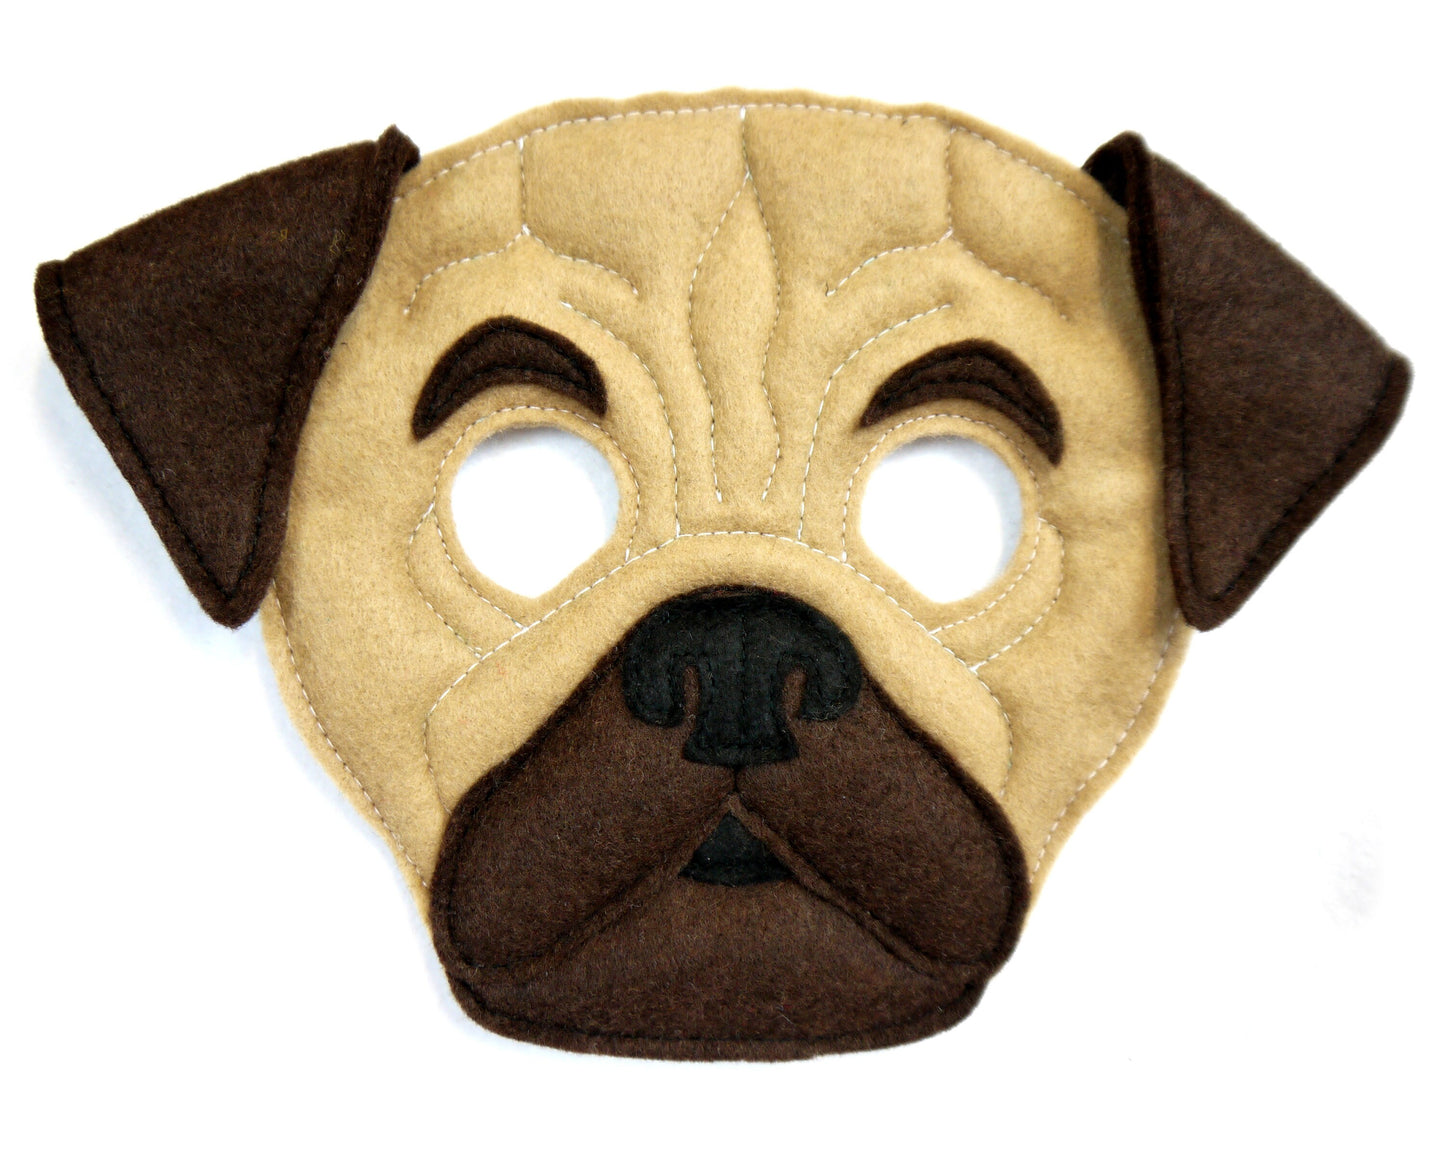 Pug costume mask book day dog gift children's or adults size birthday gift puppy